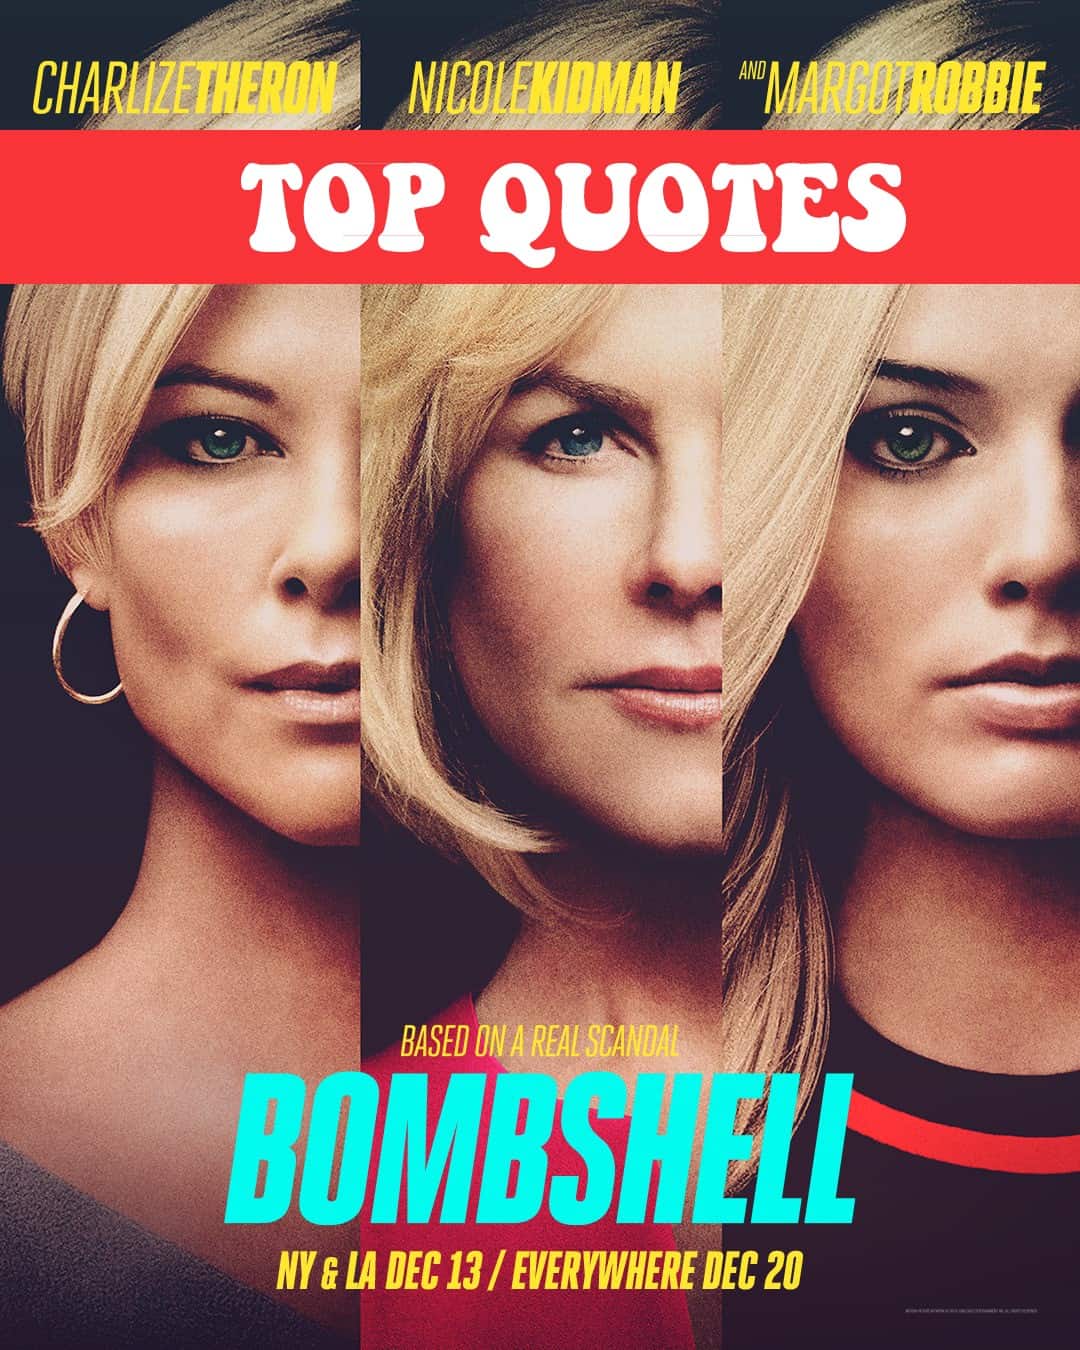 Bombshell Quotes - Top lines from the movie! - Enza's Bargains